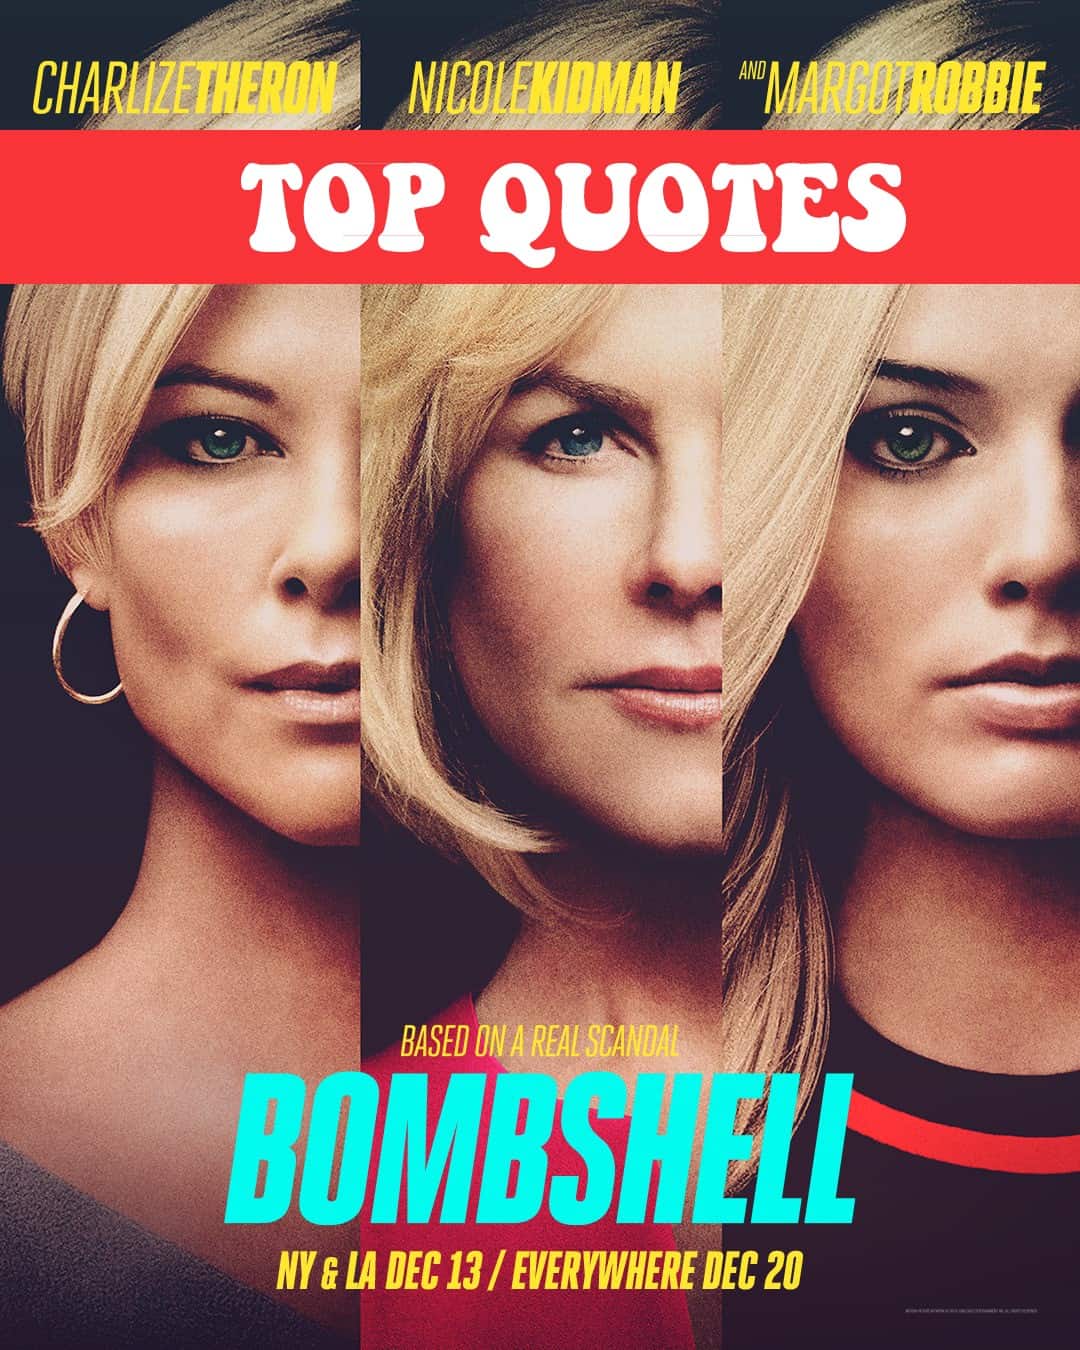 Bombshell Quotes - Top lines from the movie! - Enza's Bargains